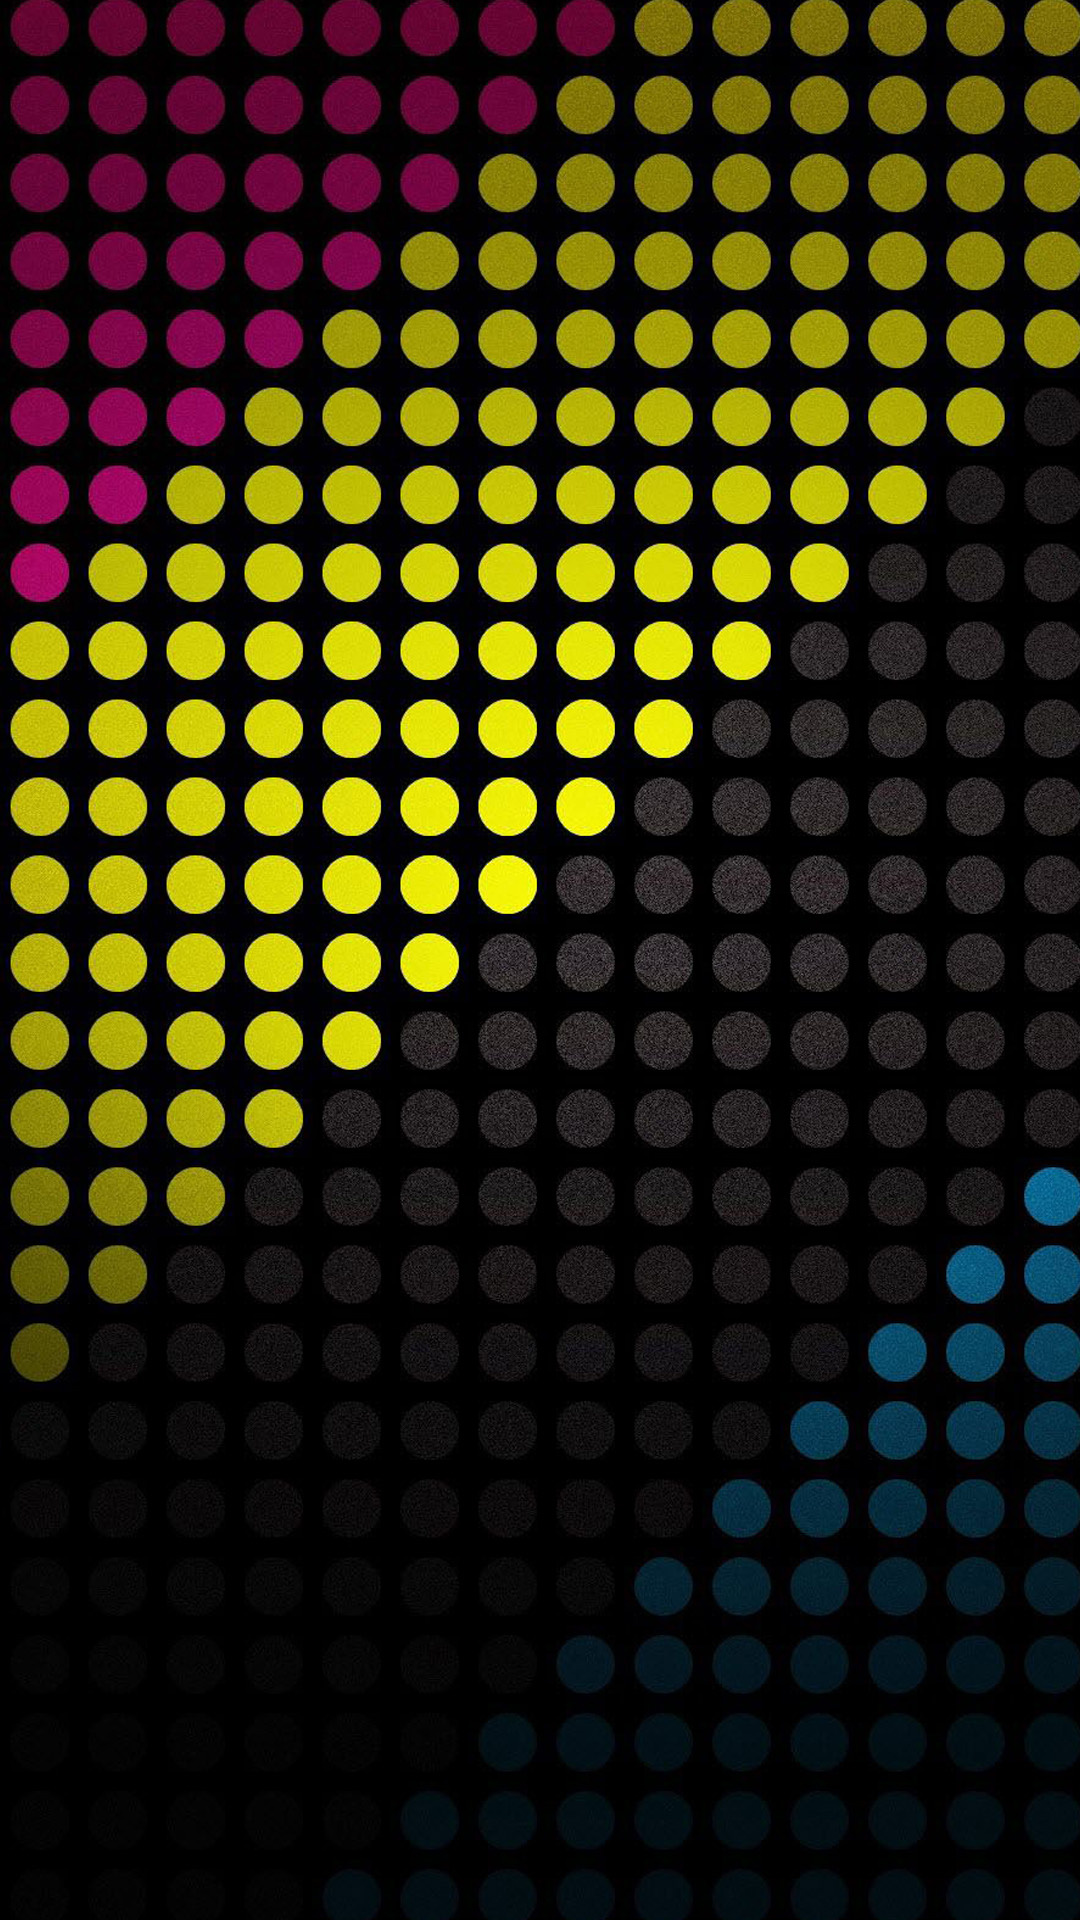 Abstract dots, Android wallpaper, Colorful design, Digital art, 1080x1920 Full HD Phone